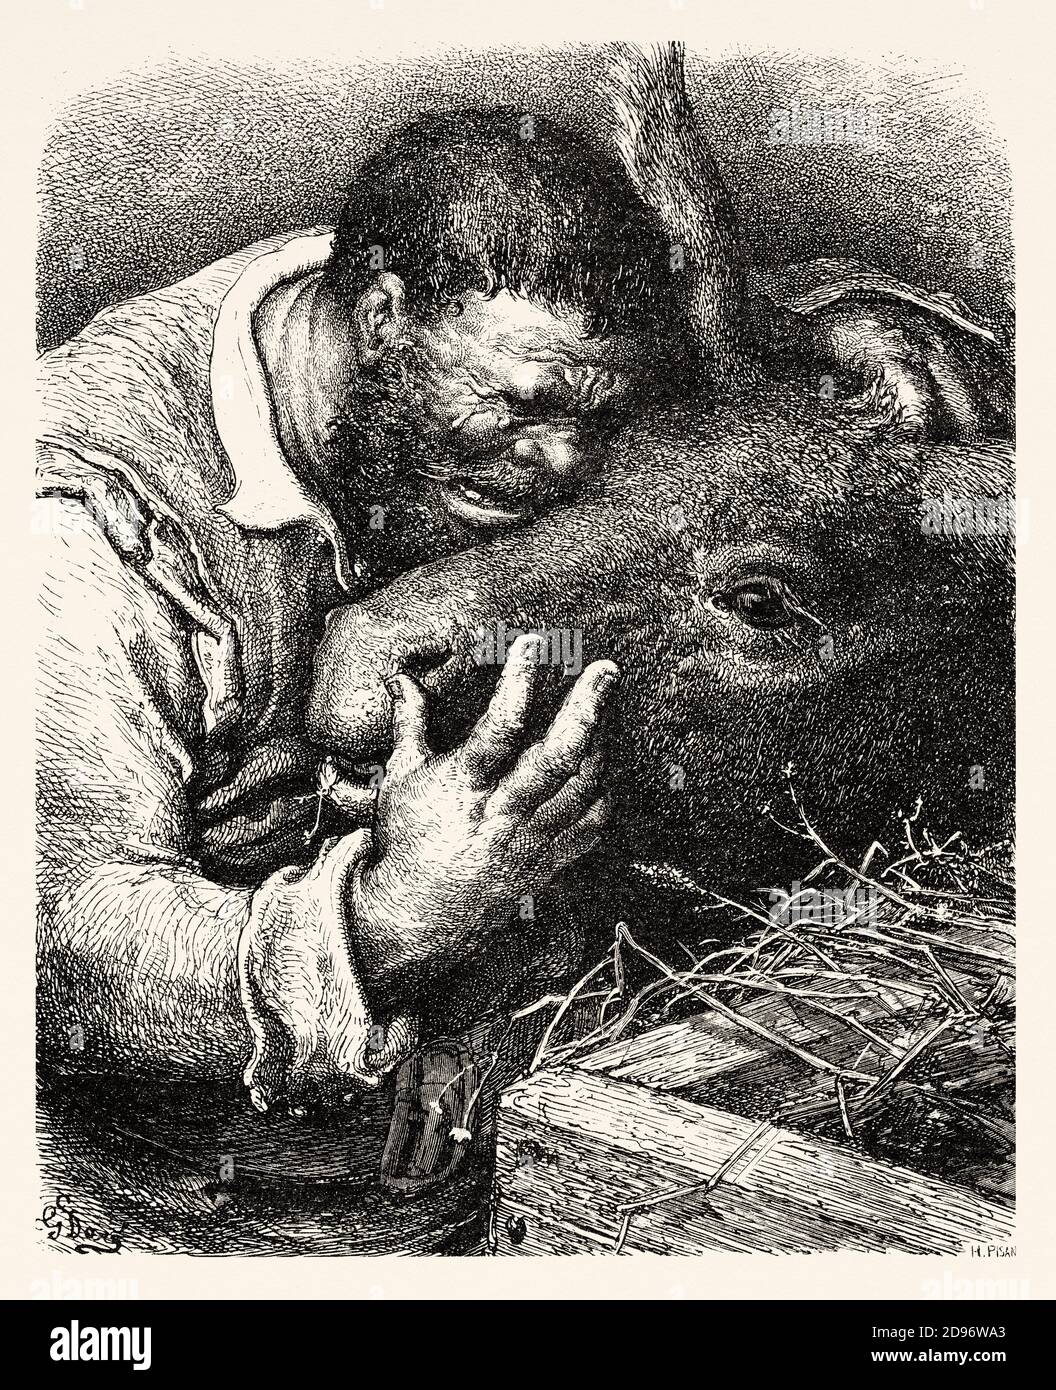 Sancho panza cries to his donkey. Don Quixote by Miguel de Cervantes Saavedra. Old XIX century engraving illustration by Gustave Dore Stock Photo